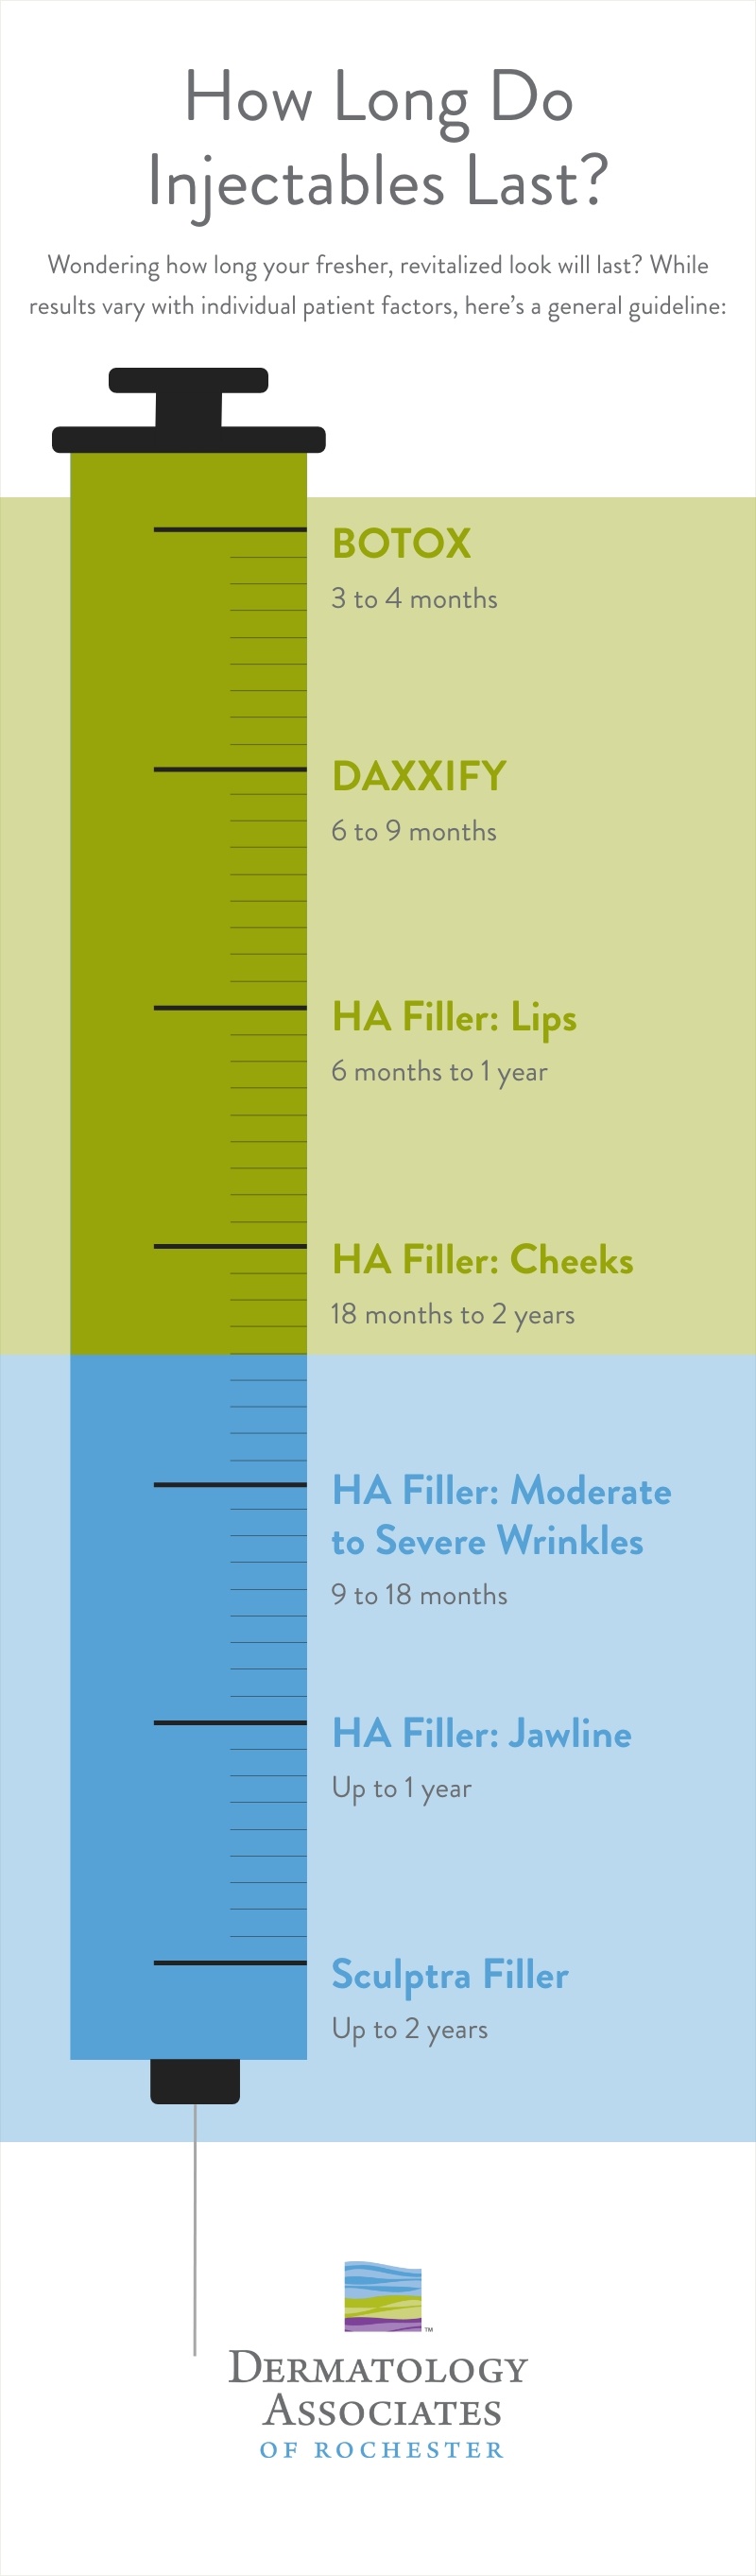 Graphic depicting how long different injectables last.